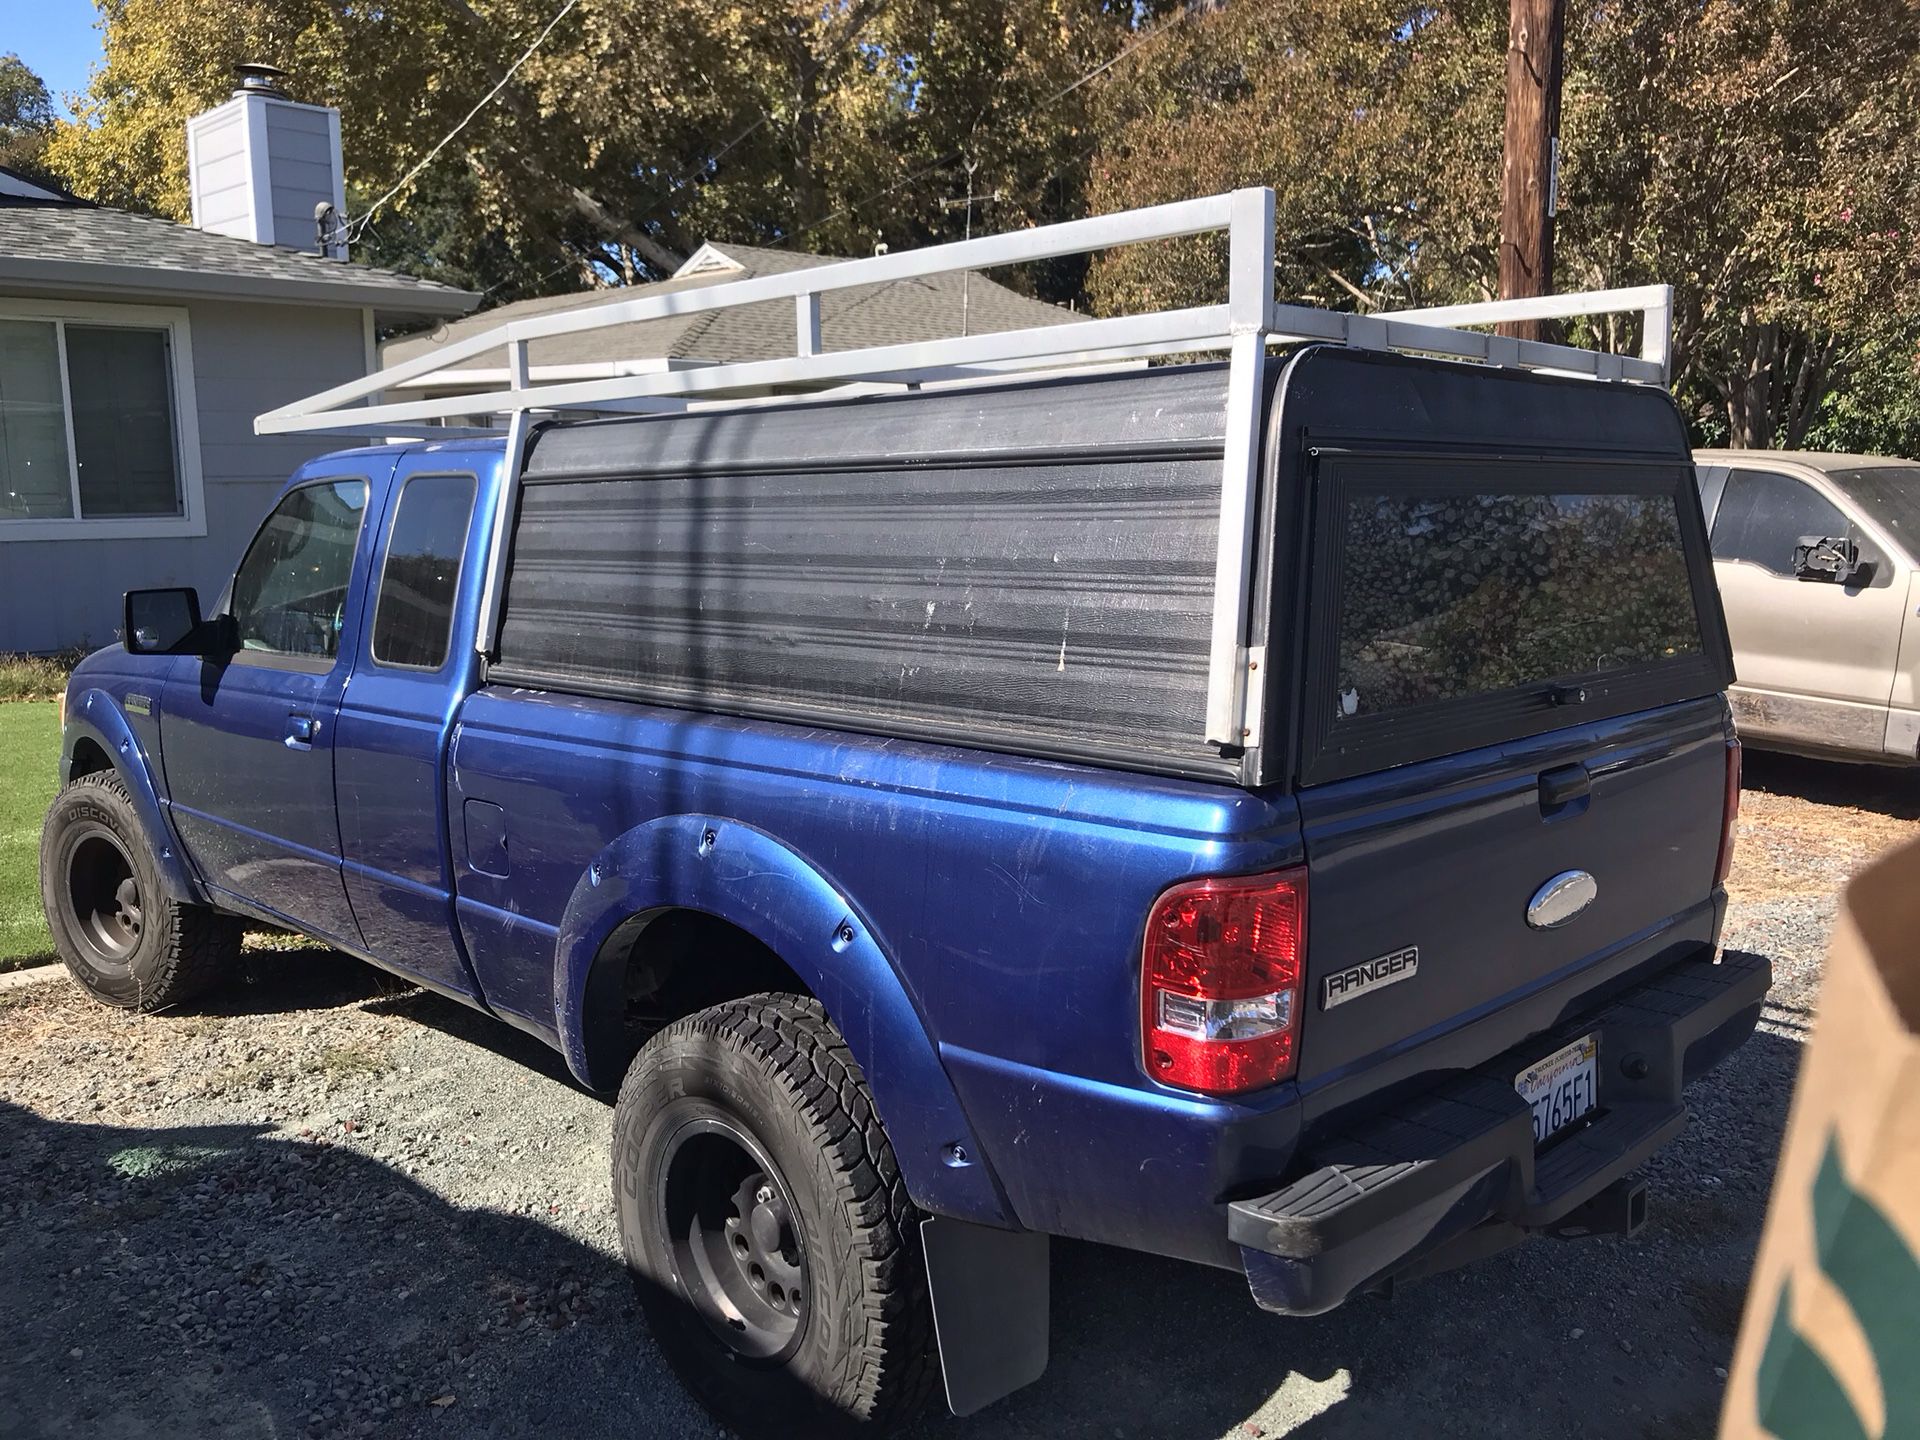 Camper shell with lumber rack